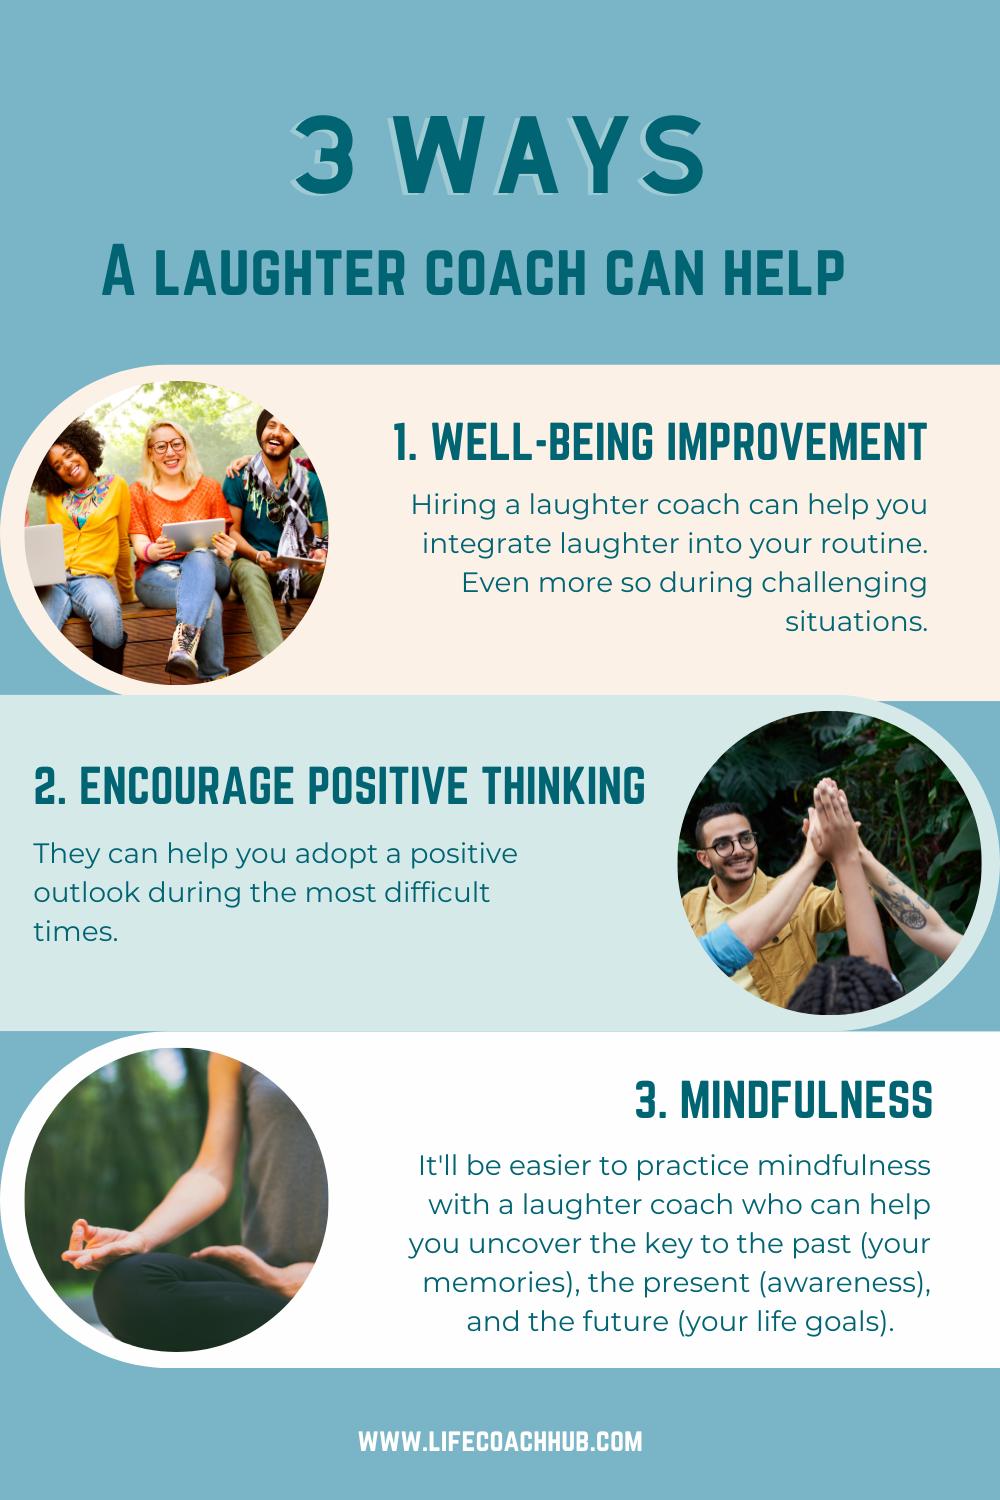 3 Ways A laughter coach can help